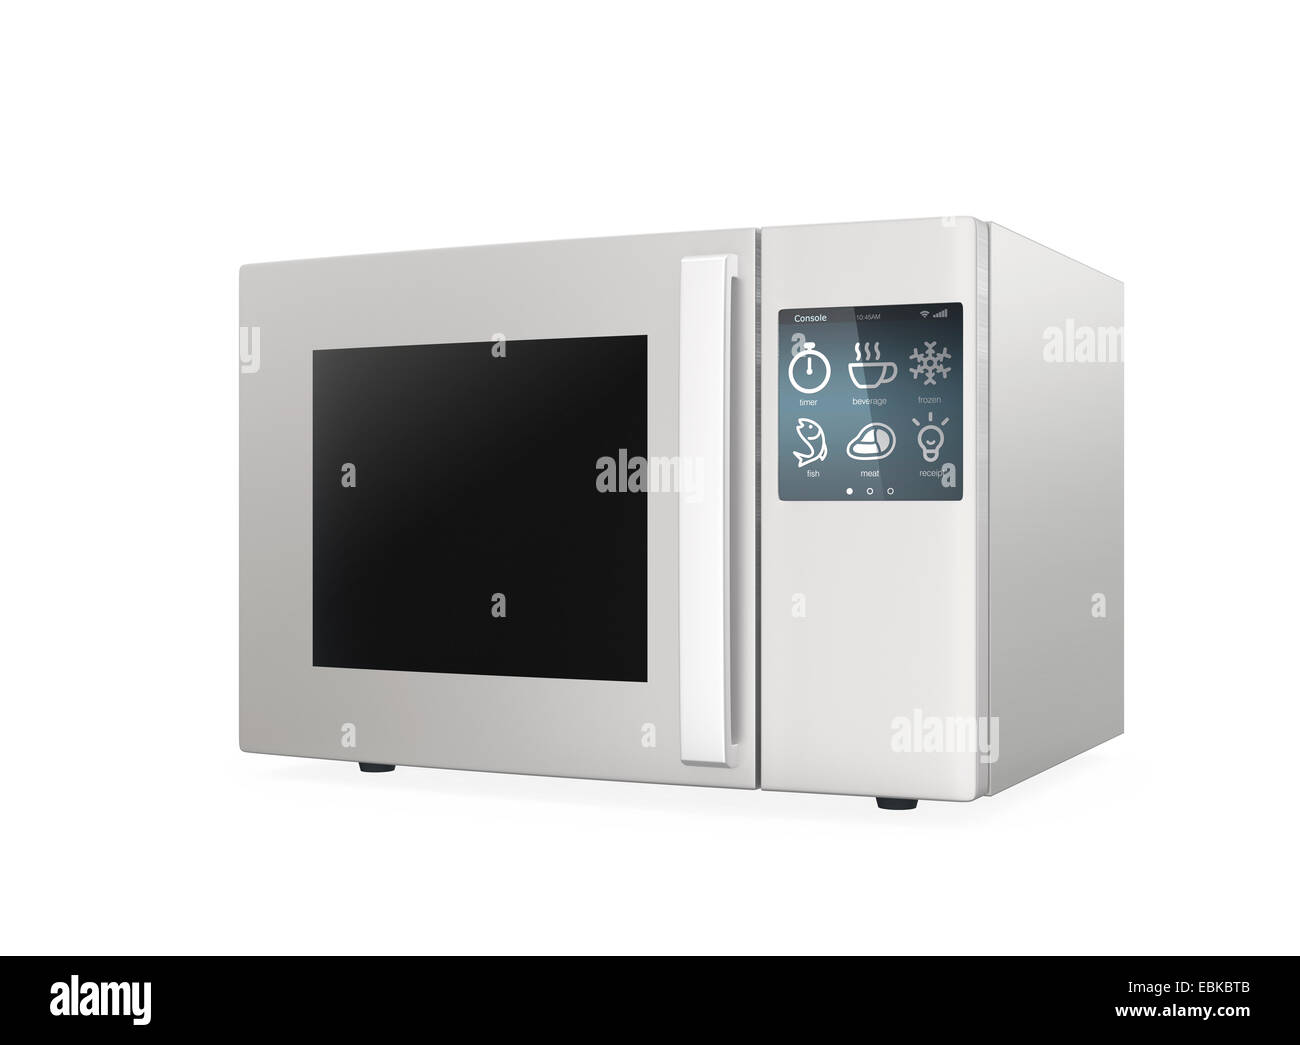 Microwave oven with touch screen isolated on white background Stock Photo